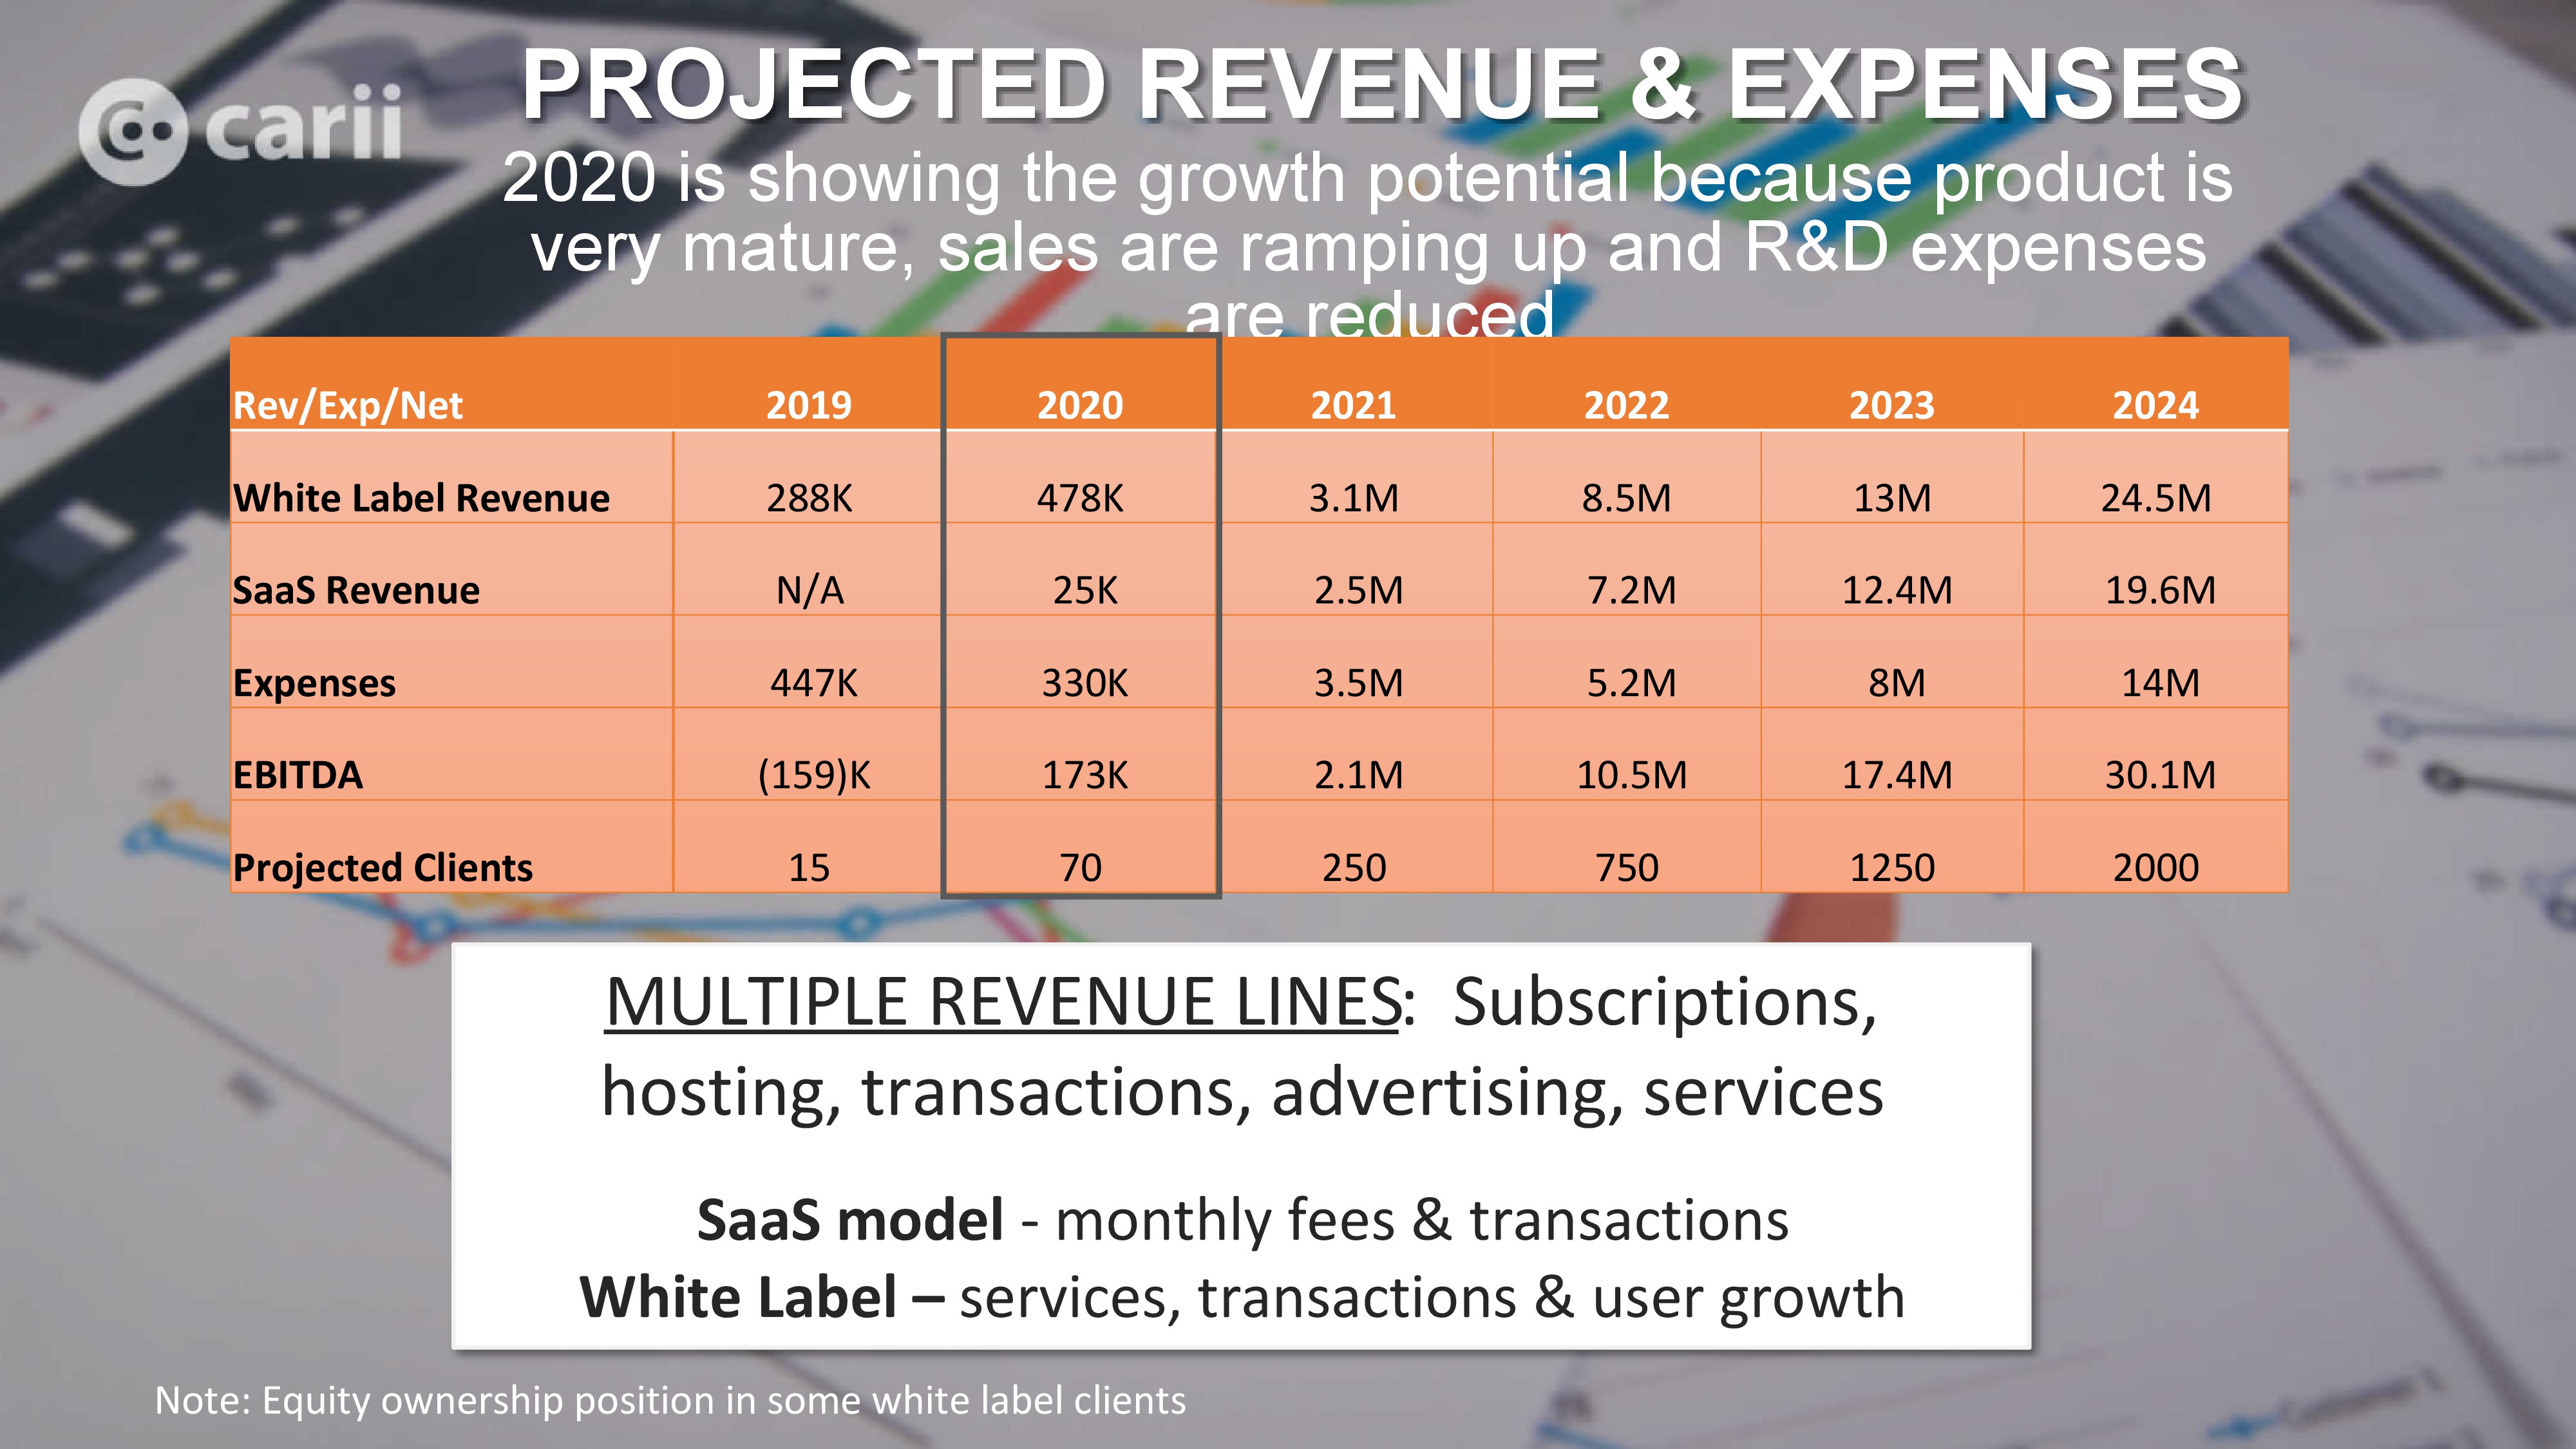 Projected revenue and expenses